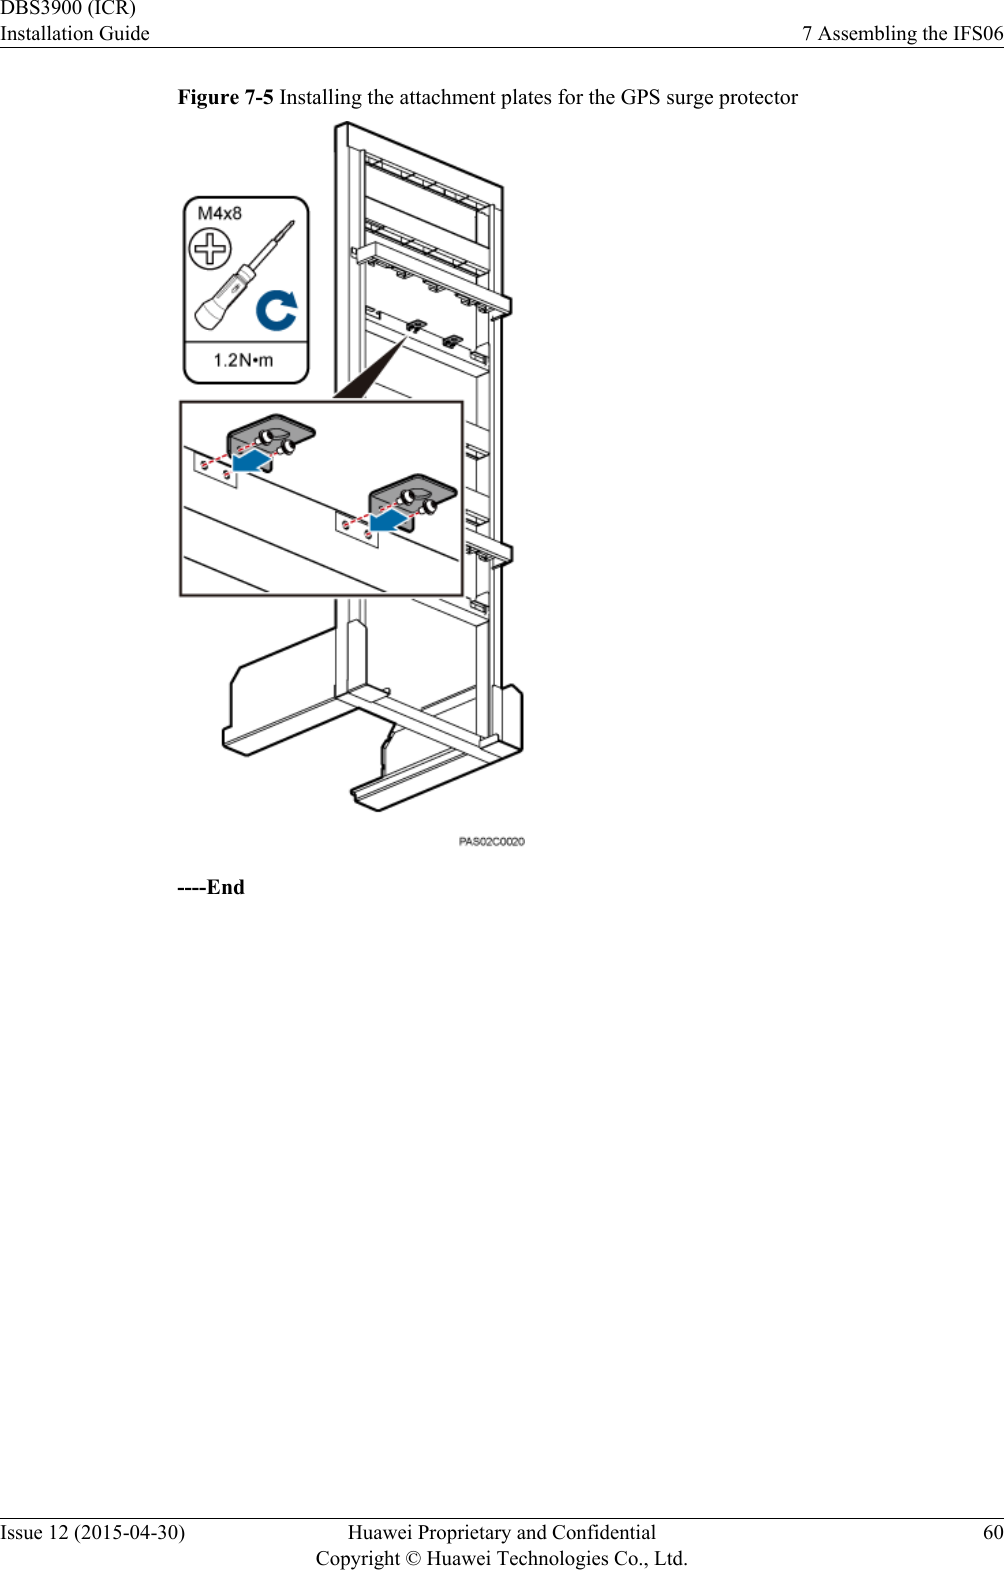 Figure 7-5 Installing the attachment plates for the GPS surge protector----EndDBS3900 (ICR)Installation Guide 7 Assembling the IFS06Issue 12 (2015-04-30) Huawei Proprietary and ConfidentialCopyright © Huawei Technologies Co., Ltd.60